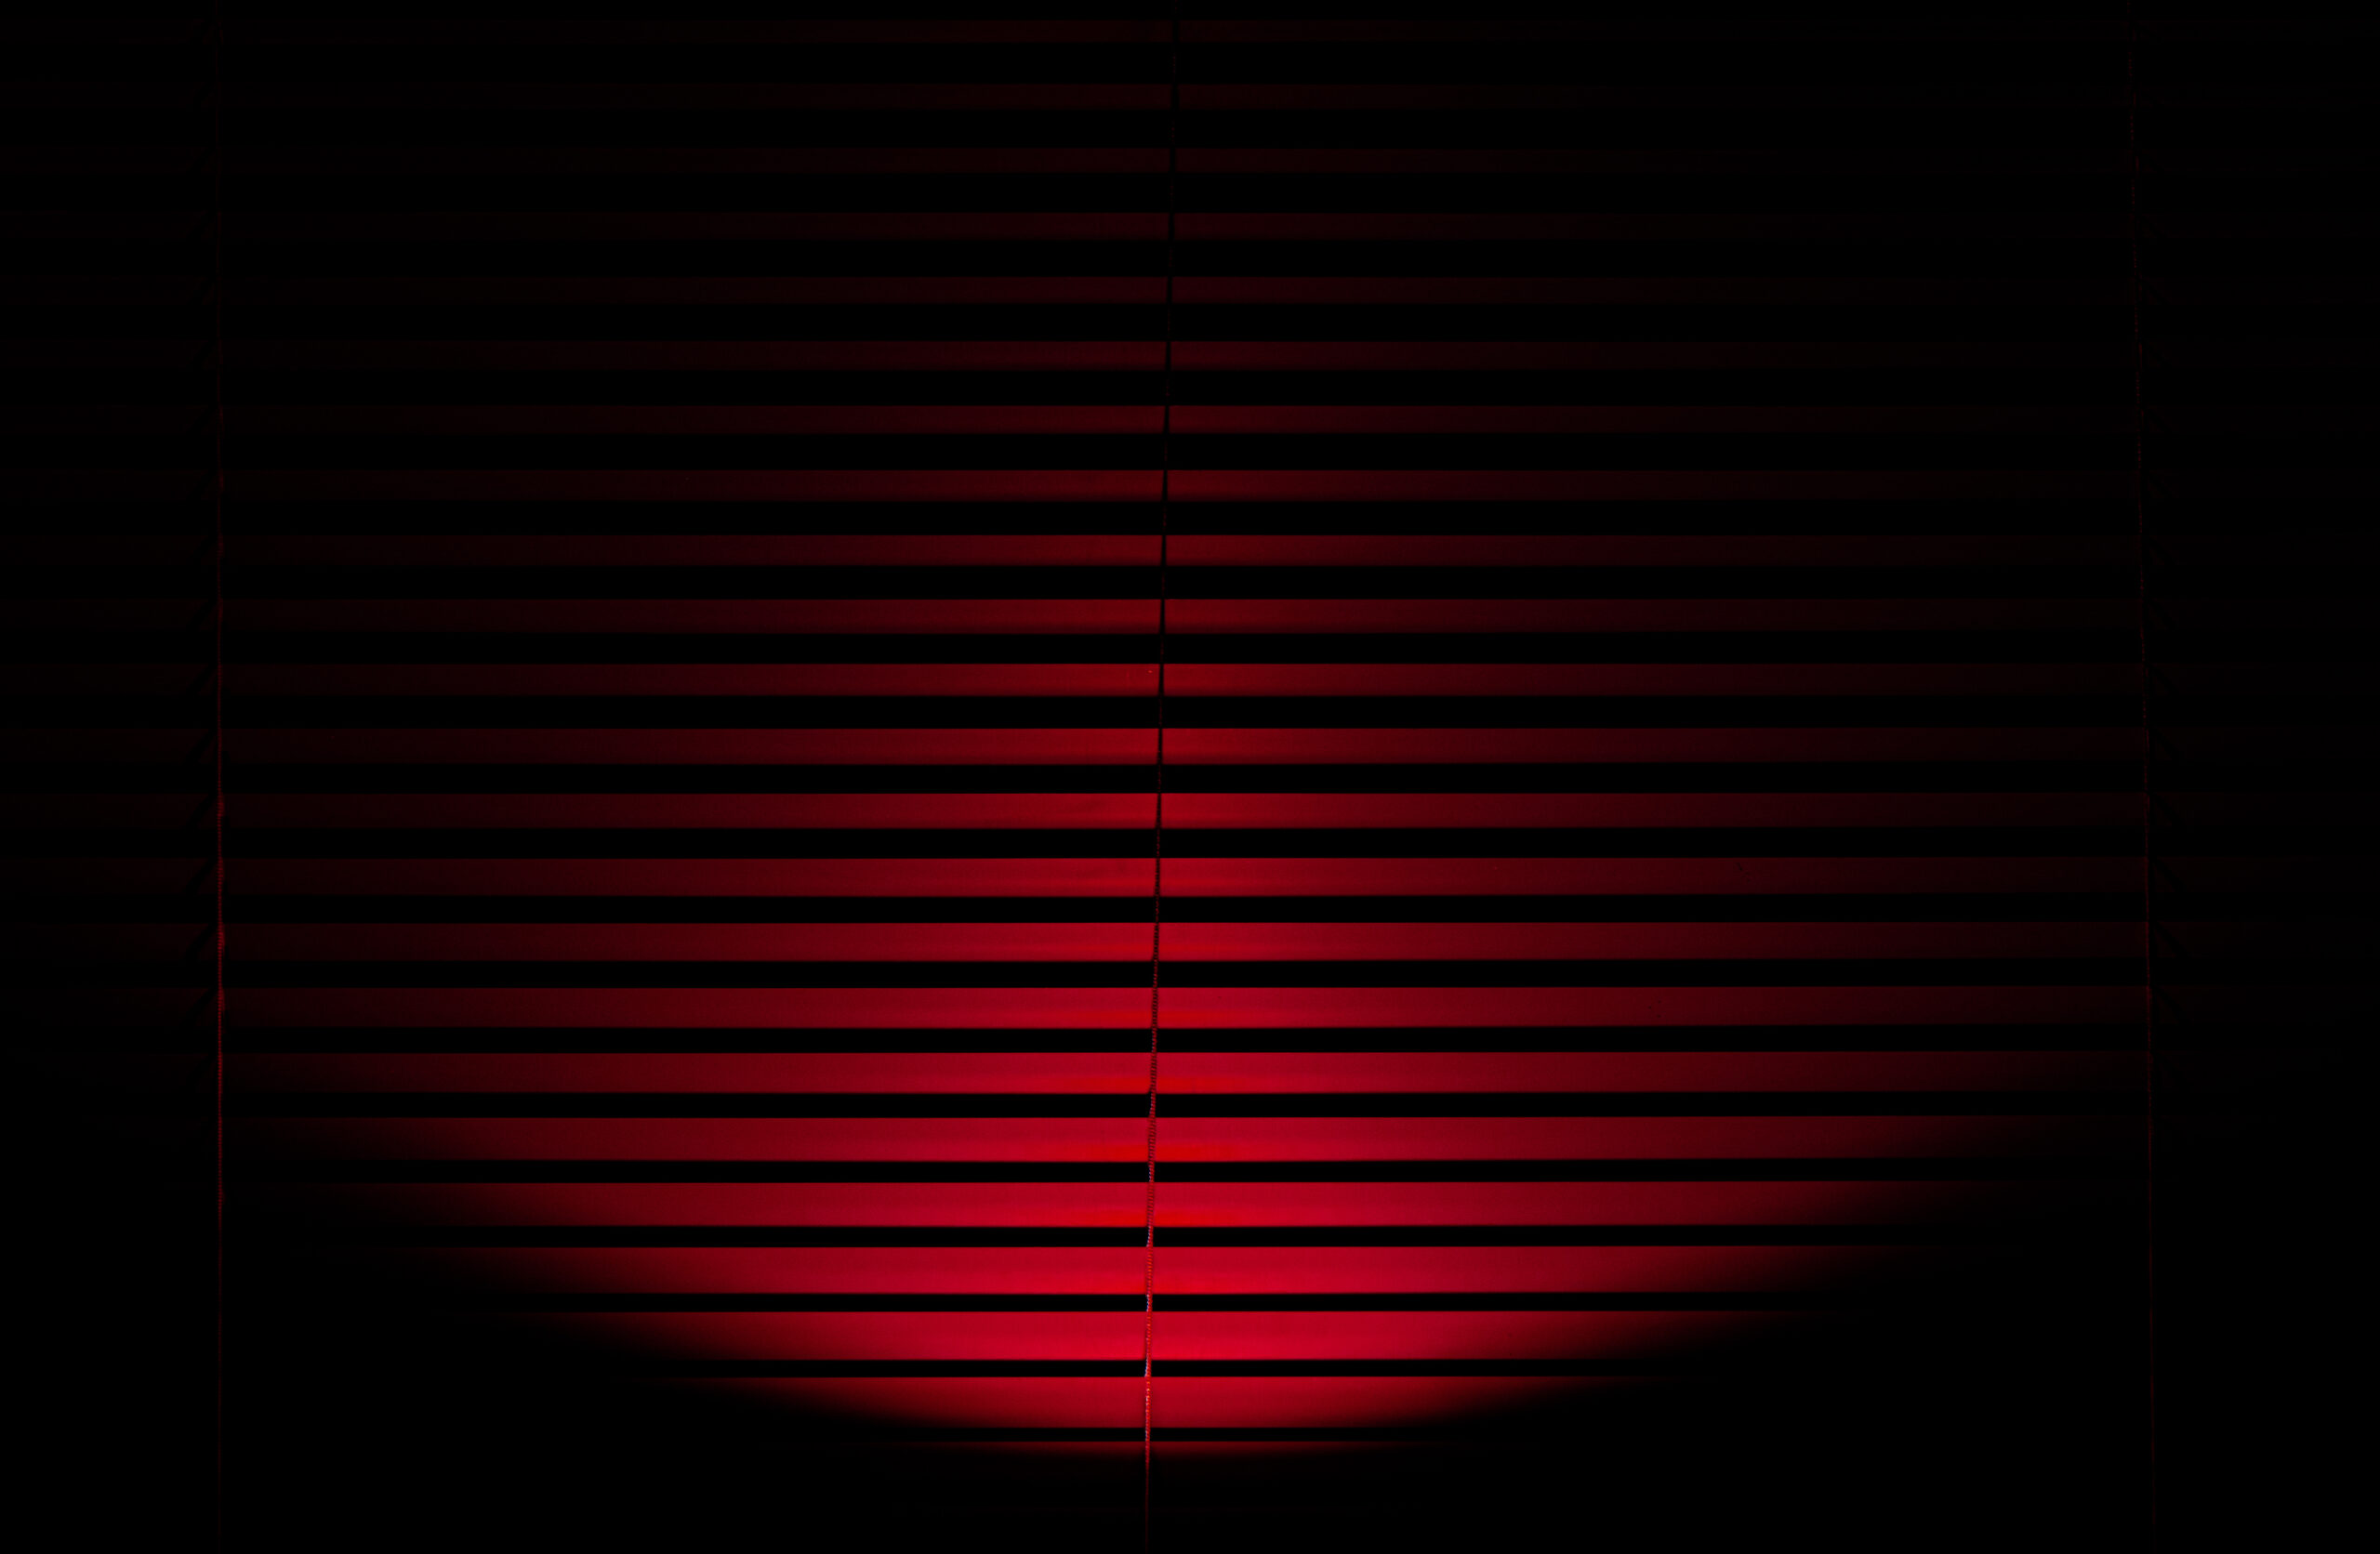 Red light shining onto closed red blinds creating a pattern of red and black lines in a semicircle